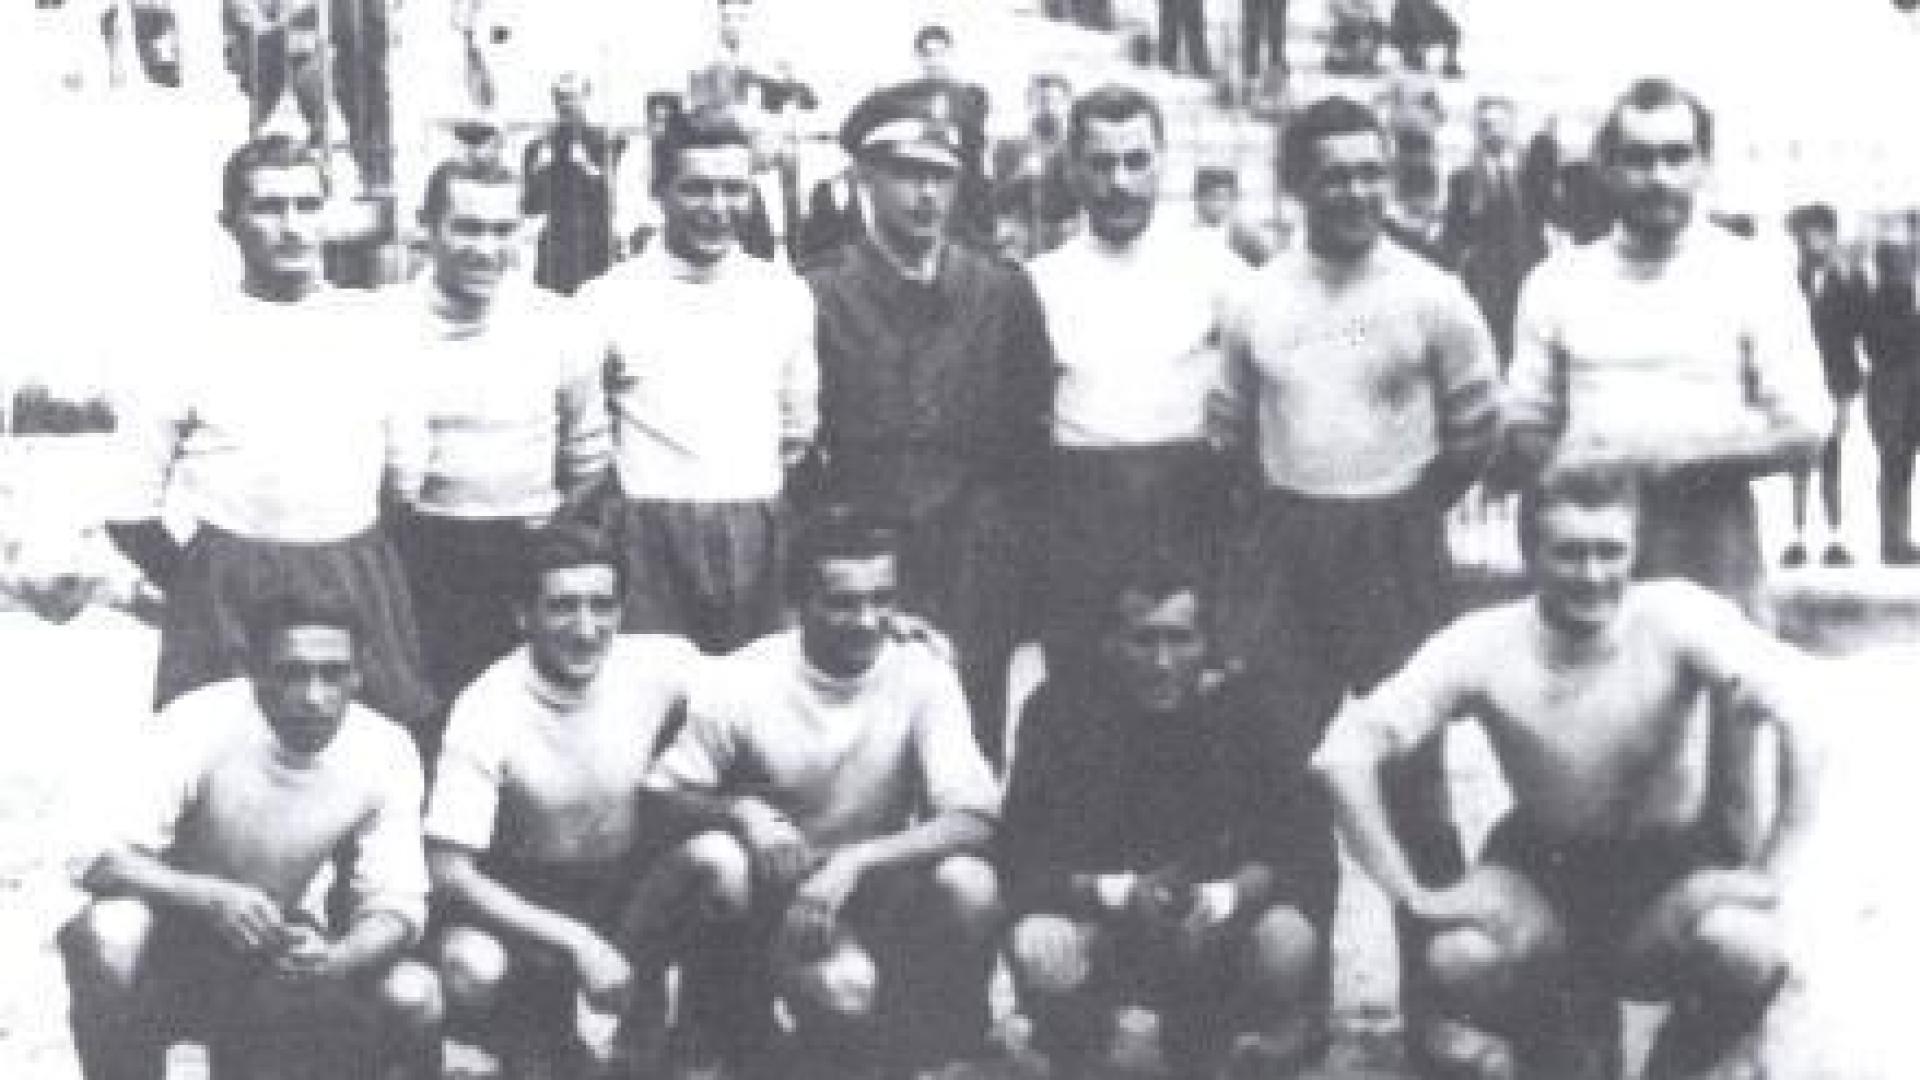 The Championship of 1944